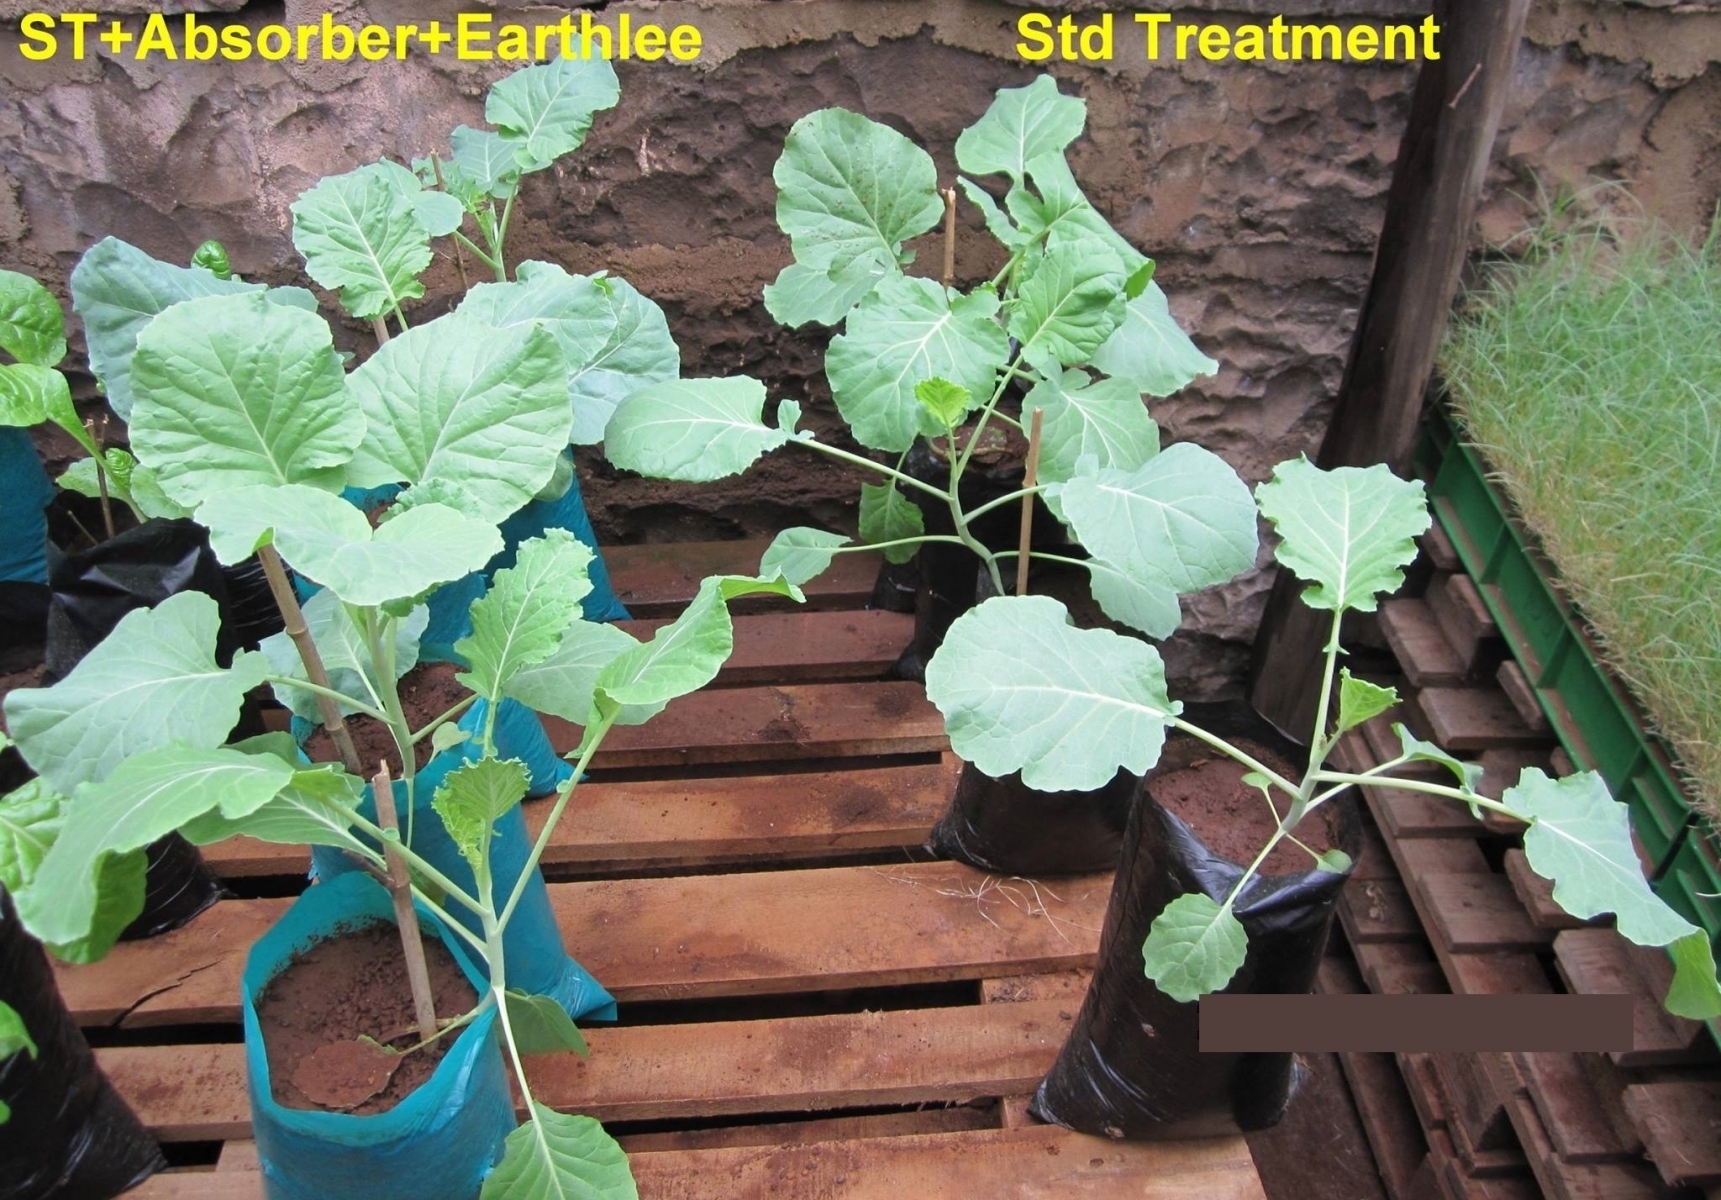 Absorber and Earthlee added to standard treatment for sukuma wiki (kales) on the left. Leaves bigger and generally healthier compared to the untreated on the right